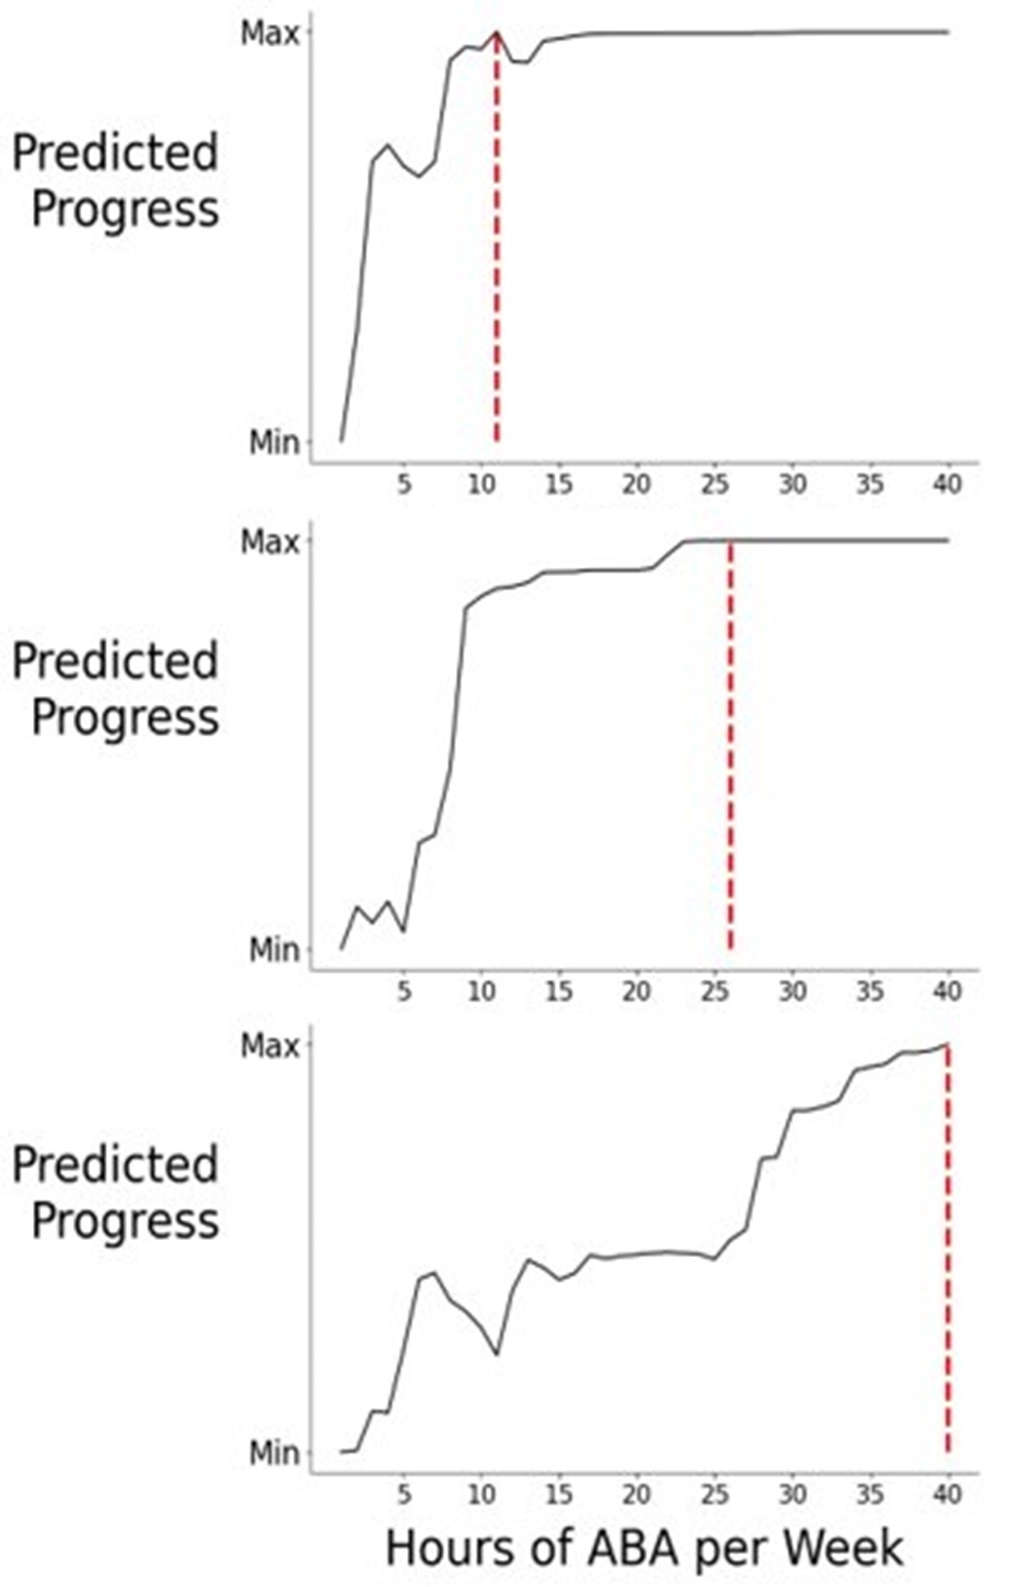 graphs of Predicted Progress by ABA hours per week